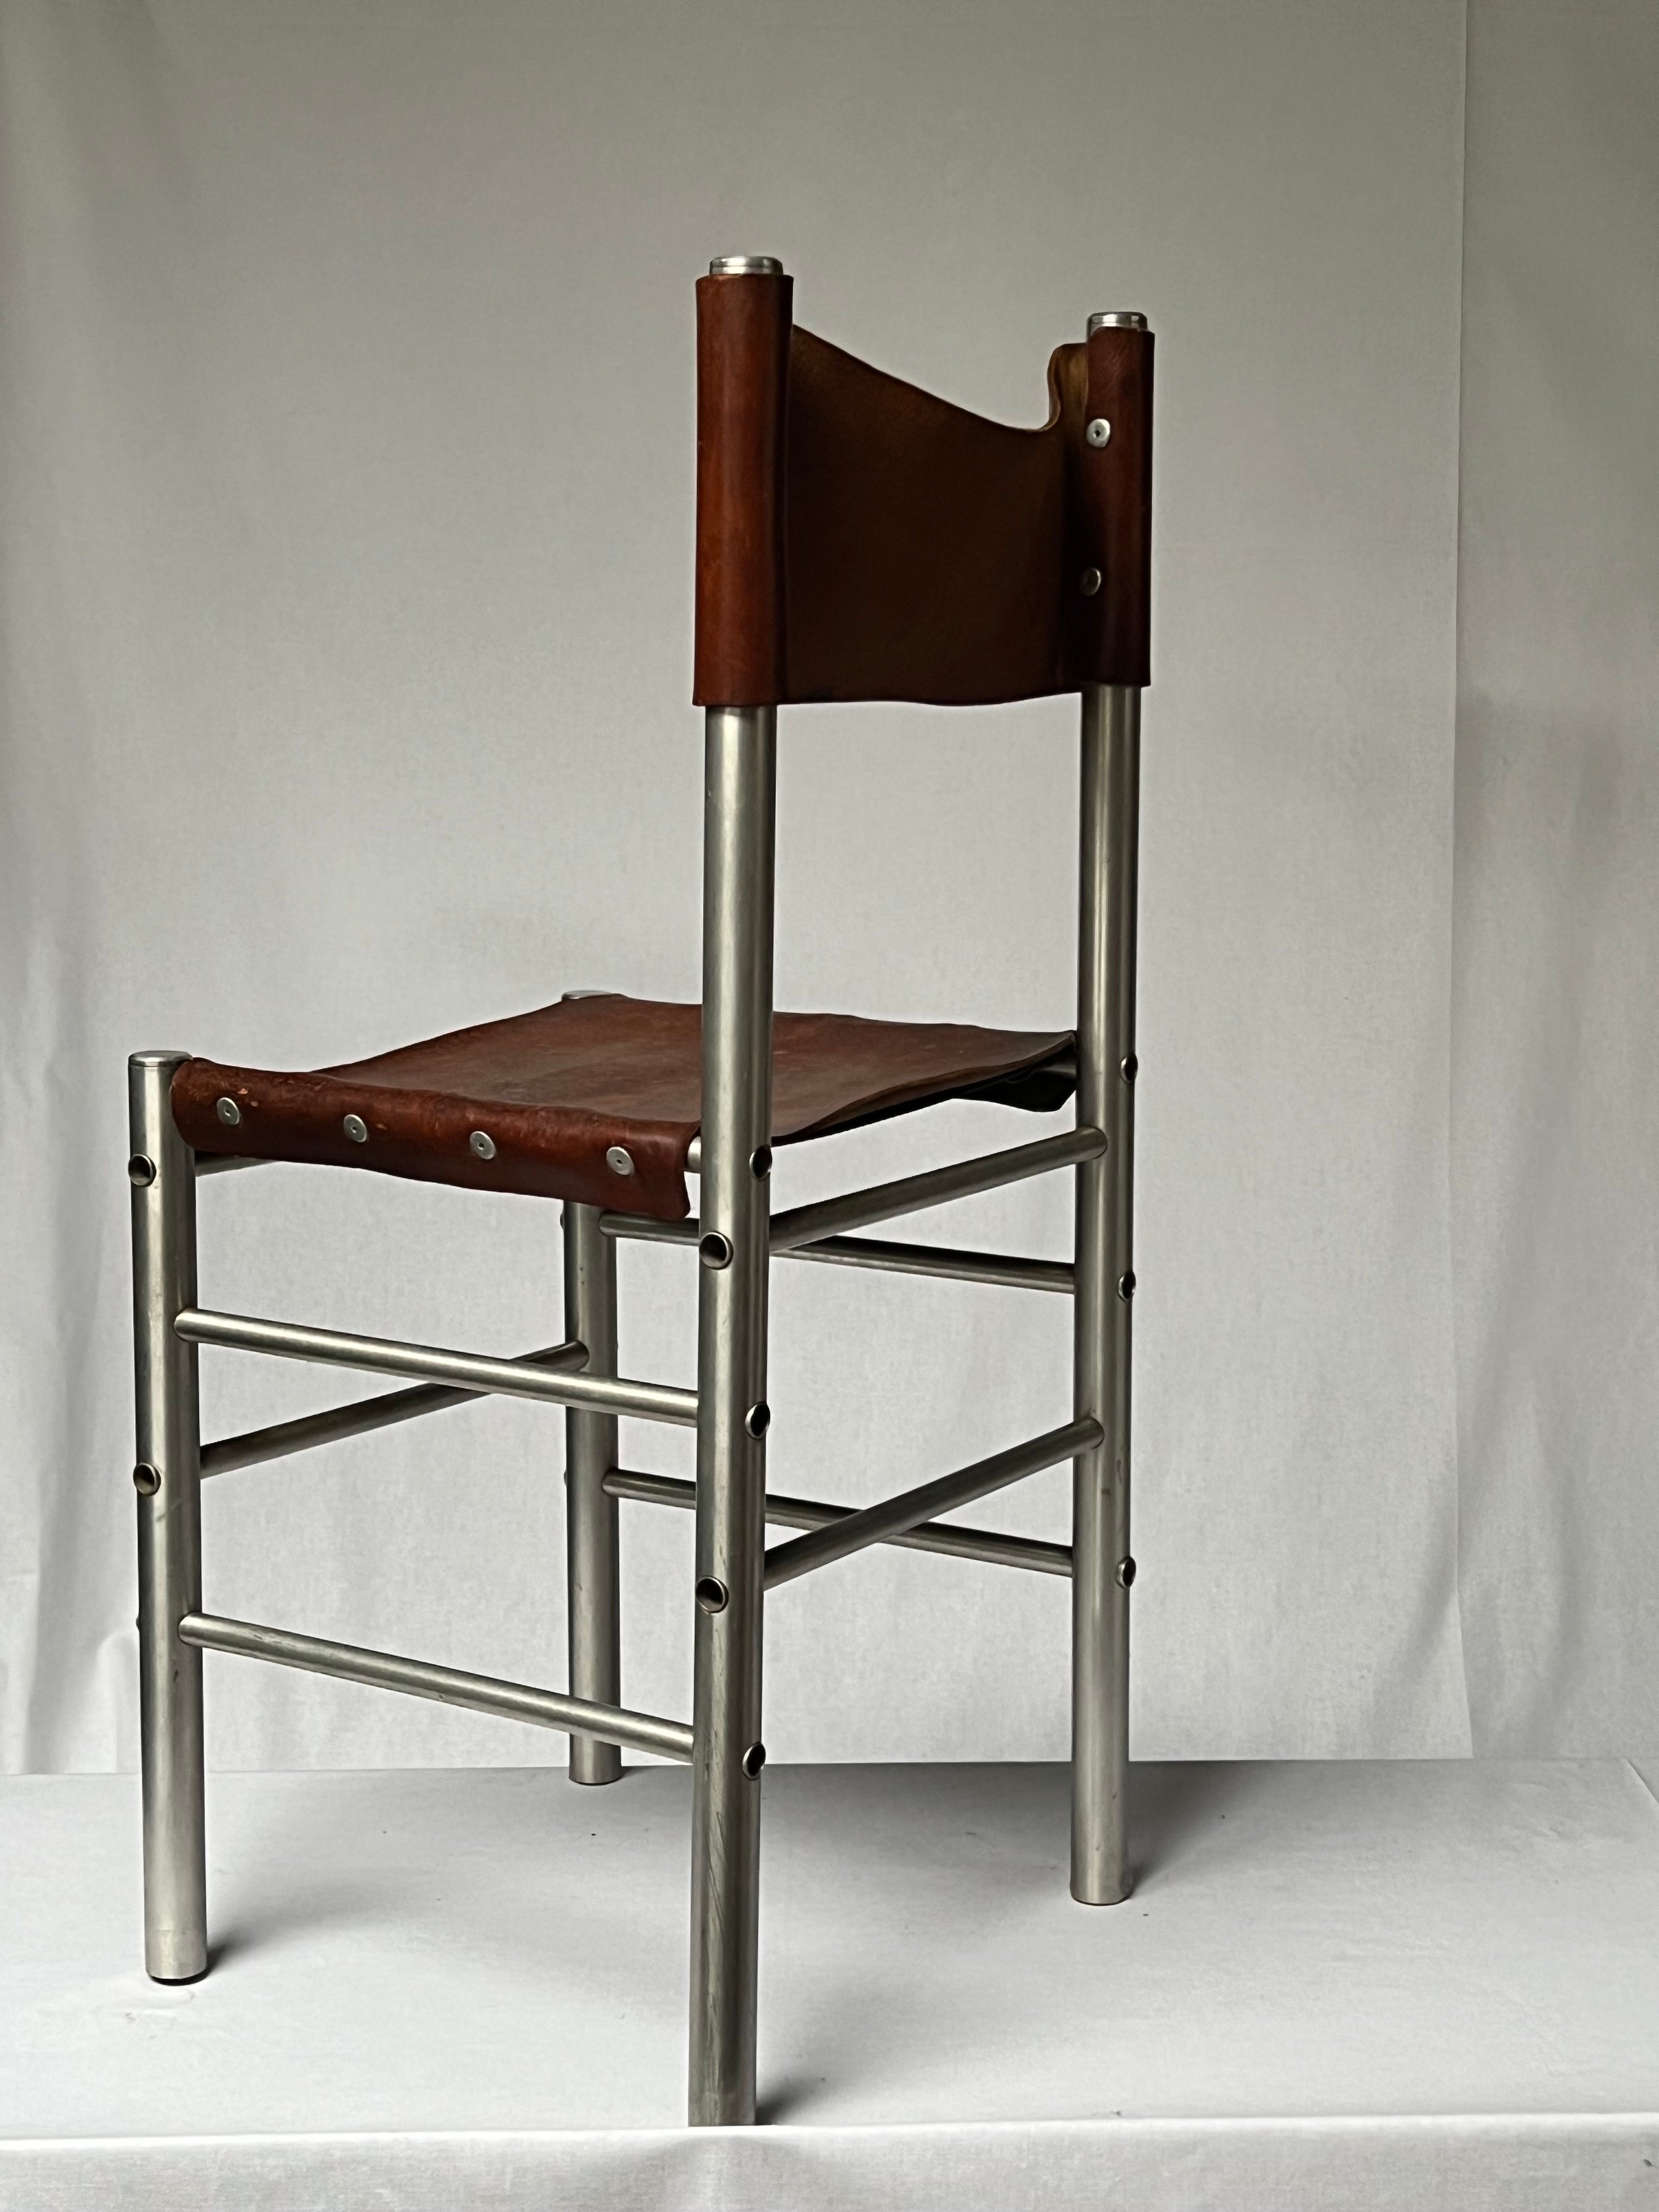 Very unique handmade aluminum tubular and leather chair. the dimensions are smaller than a regular chair. The height and seat height are standard. The overall is patinated and shows various shades of brown/brownish colors on the leather. Elegant and